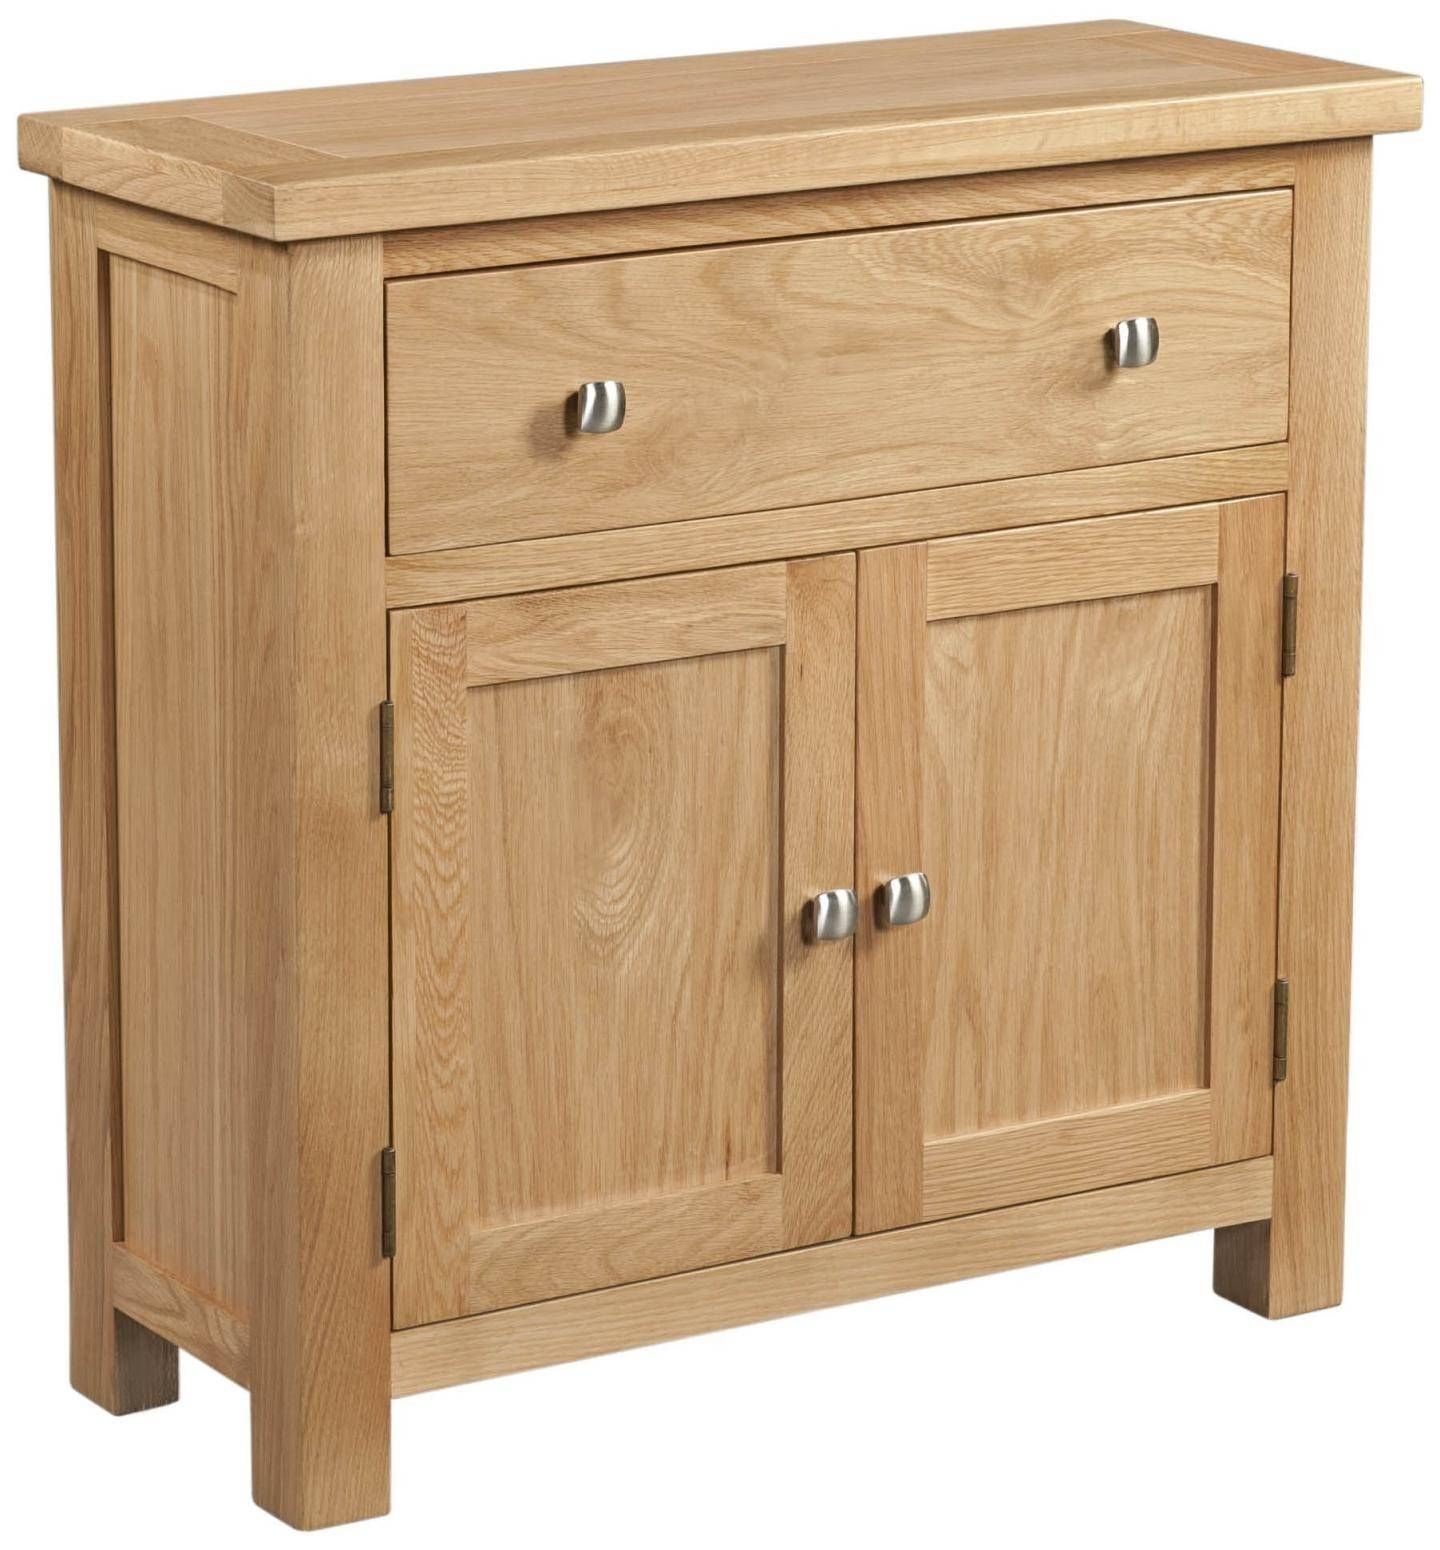 Abbey Oak Small Sideboard With Small Sideboards With Drawers (View 7 of 15)